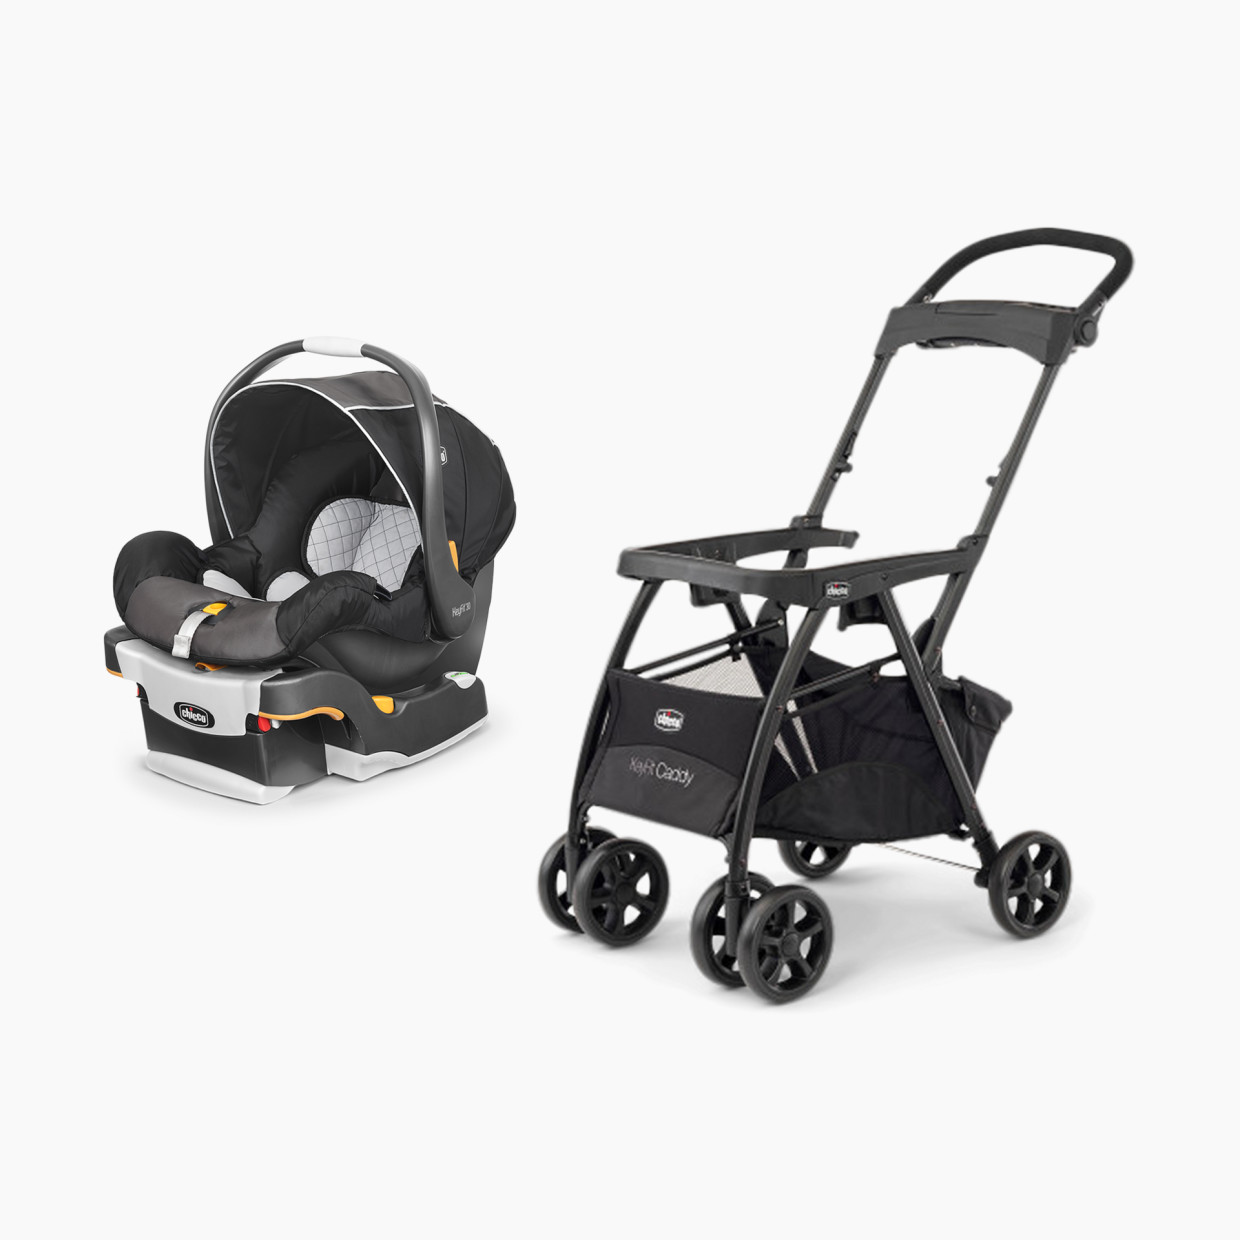 Chicco Chicco KeyFit 30 Infant Car Seat & KeyFit Caddy Frame Stroller - Iron.